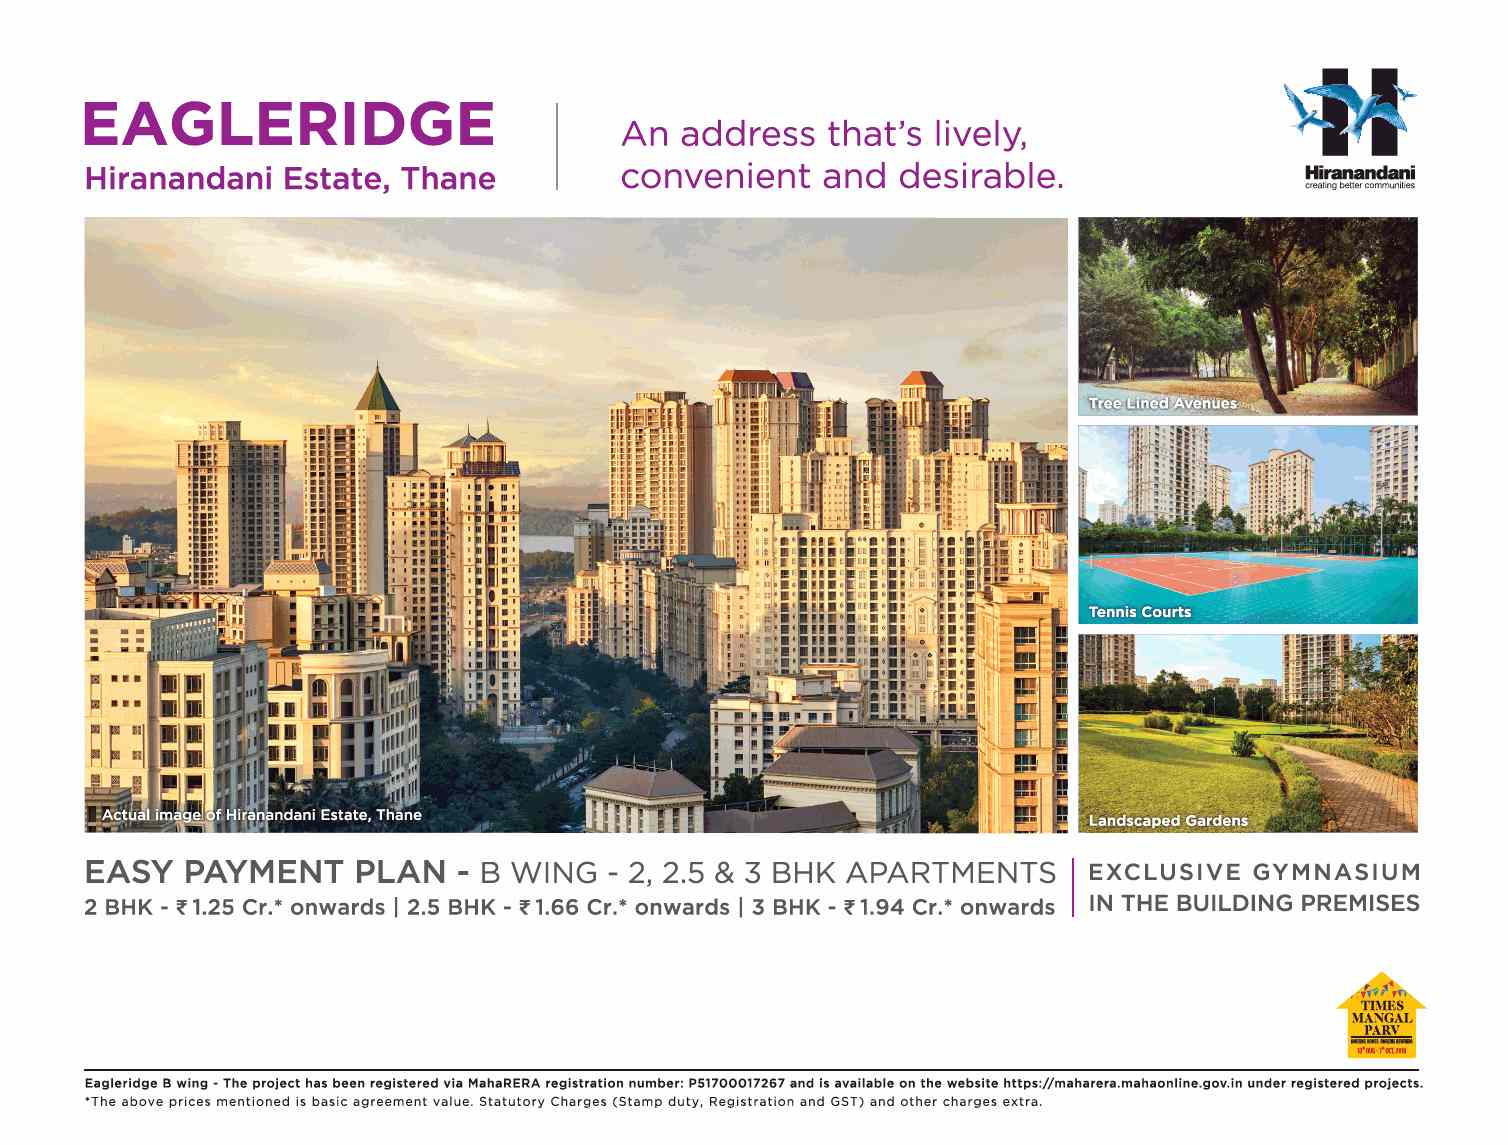 Hiranandani Eagleridge - An address that's lively, convenient and desirable in Mumbai